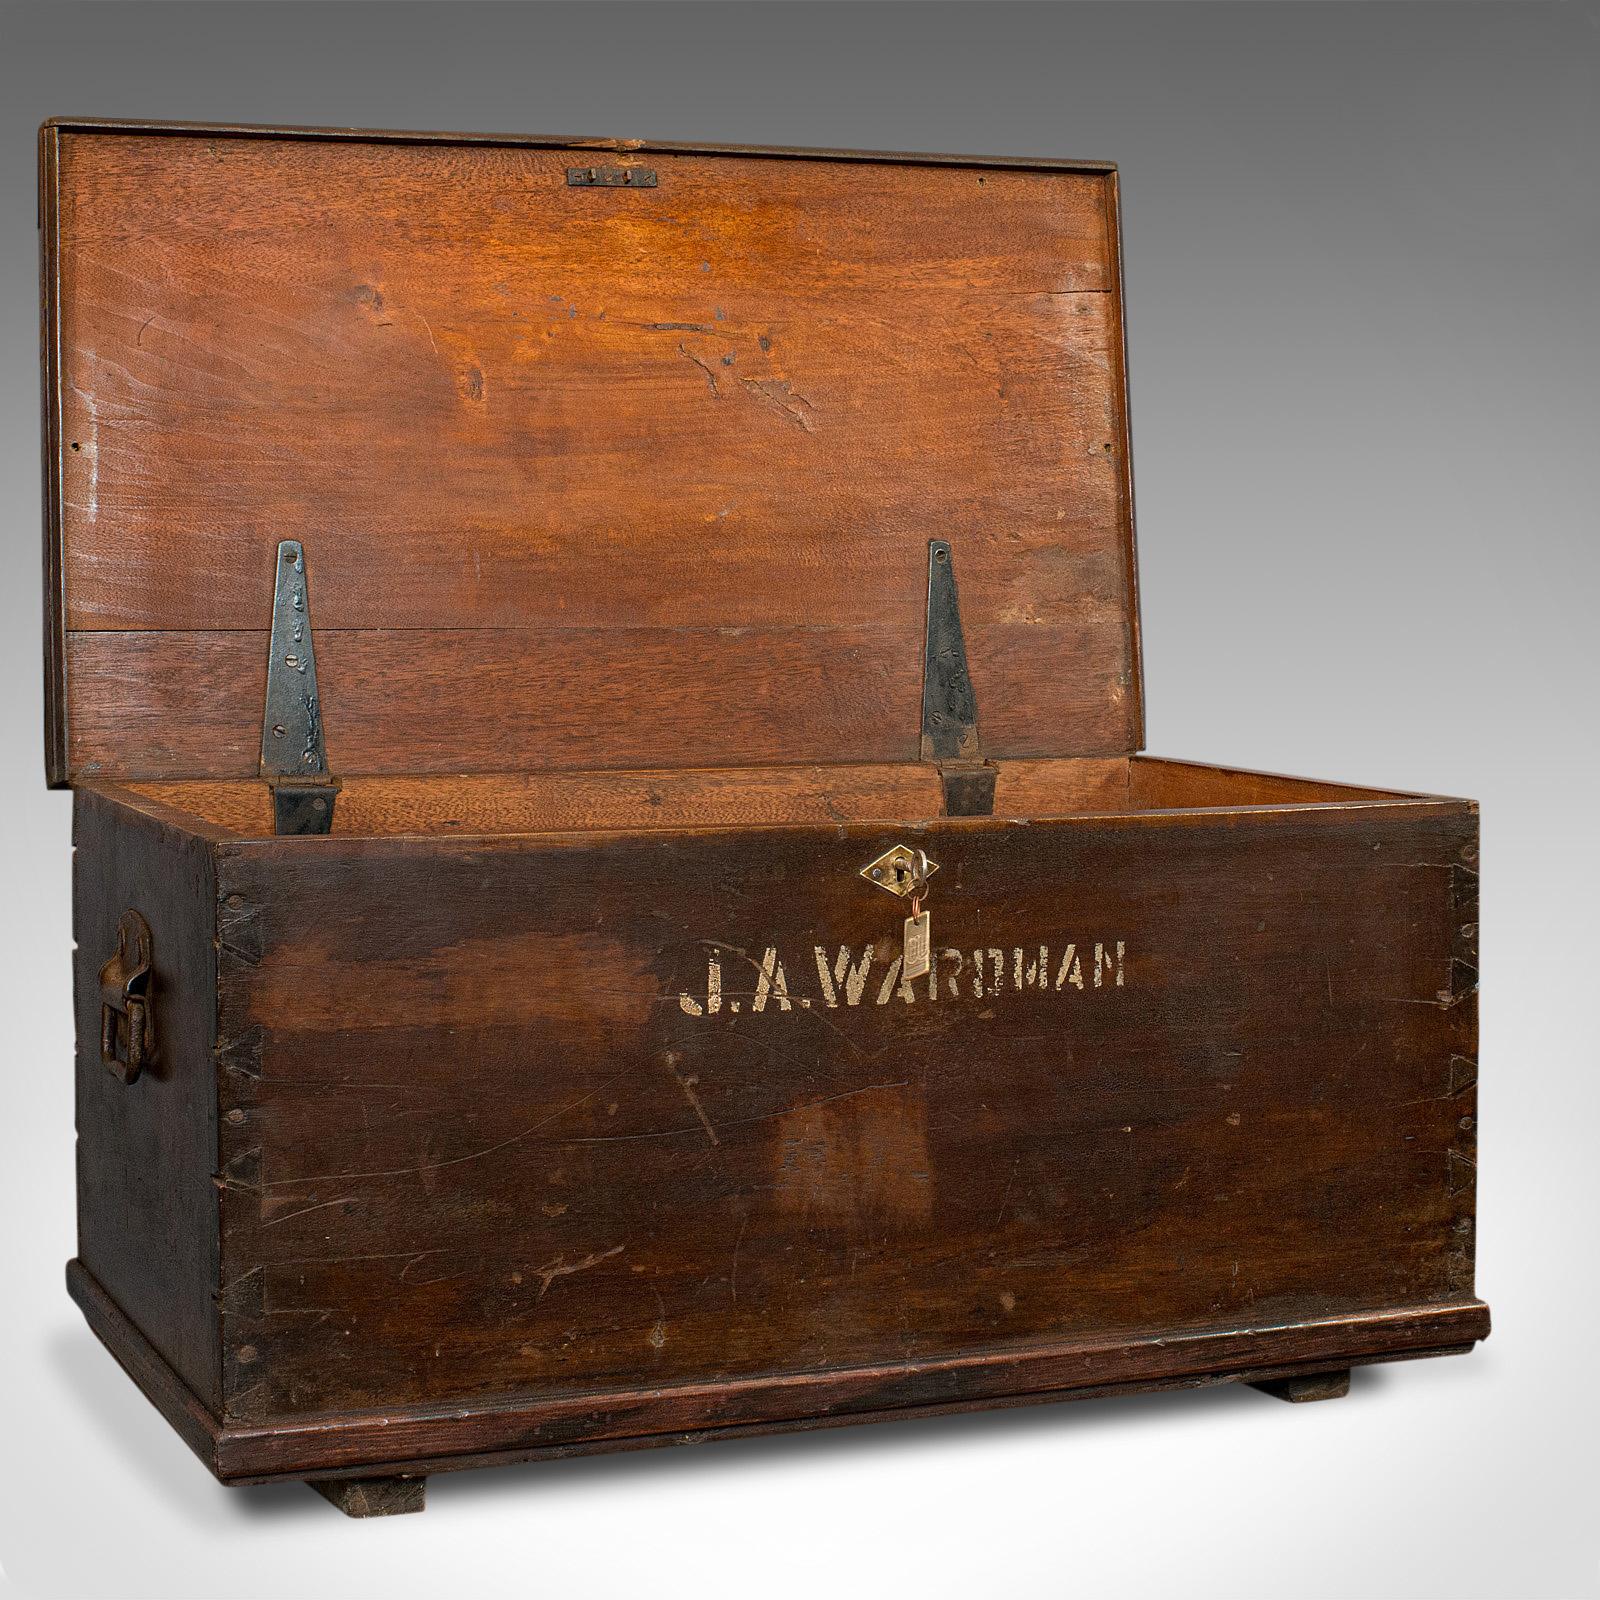 This is an antique officer's Campaign chest. An English, mahogany travelling trunk, dating to the late 19th century, circa 1880.

A fine example of Victorian Campaign furniture
Displays a desirable aged patina
Mahogany shows fine grain